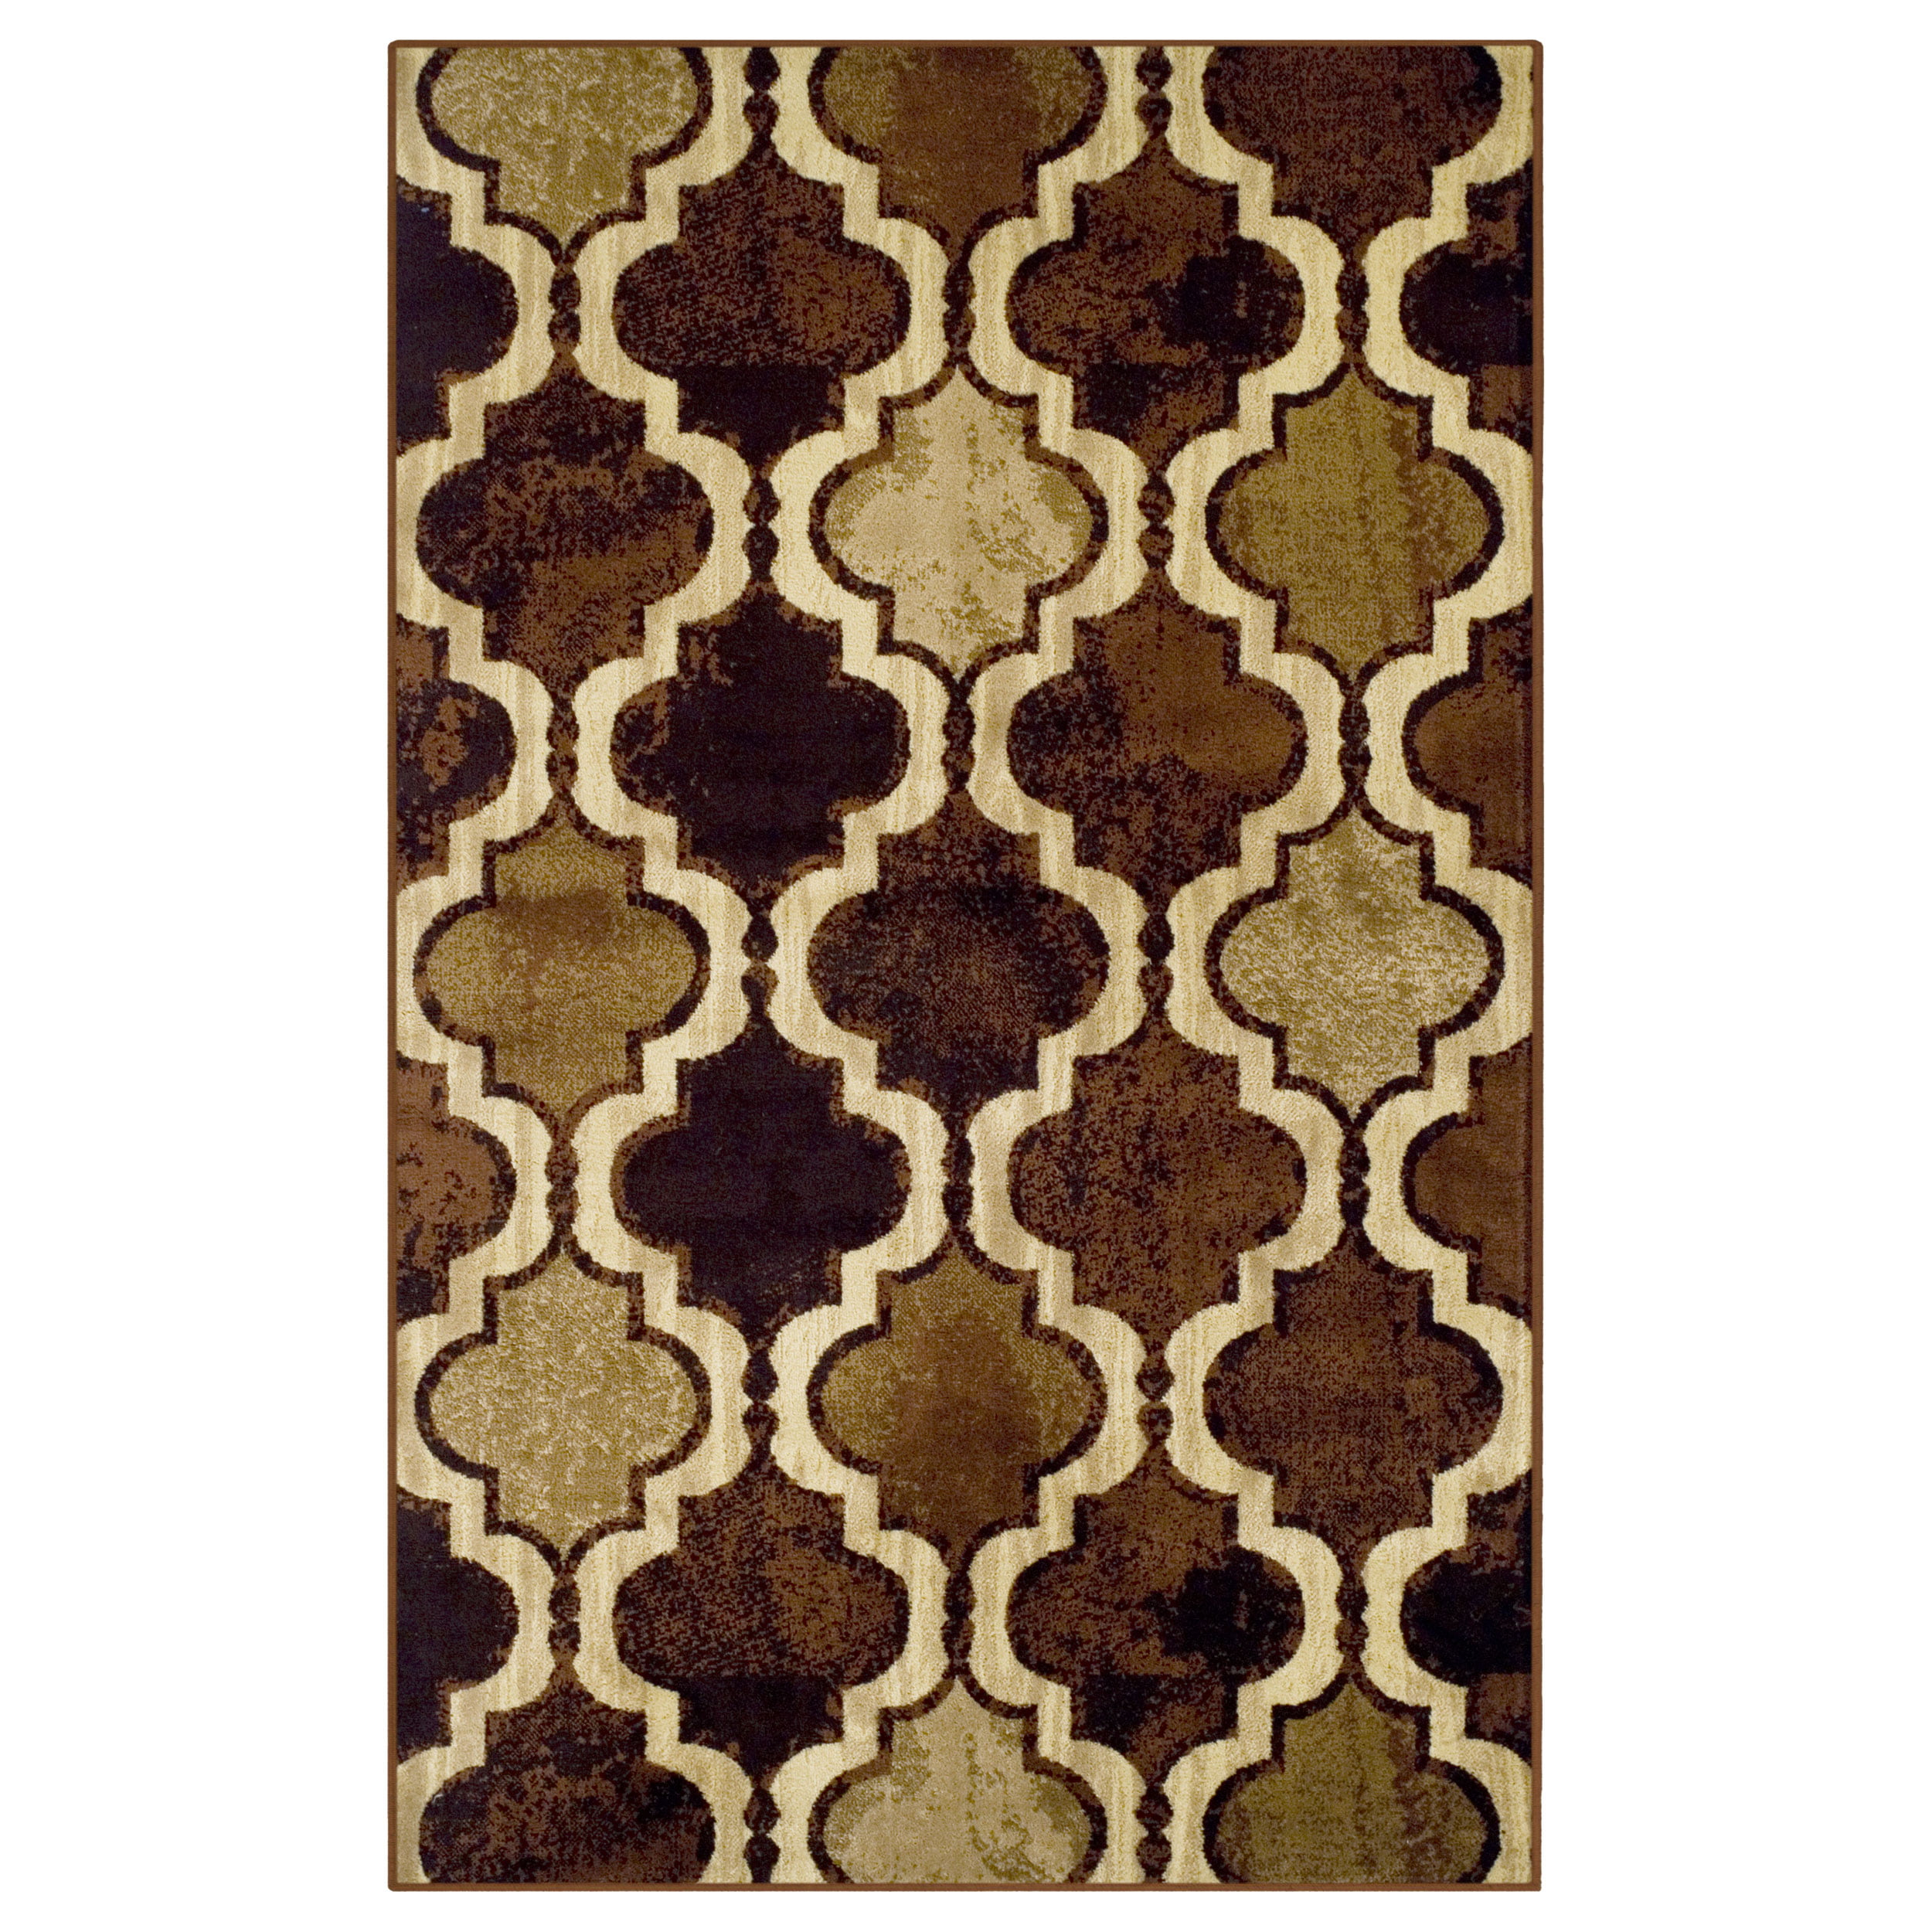 SUPERIOR Jarvis Area Rug Collection 4X6 